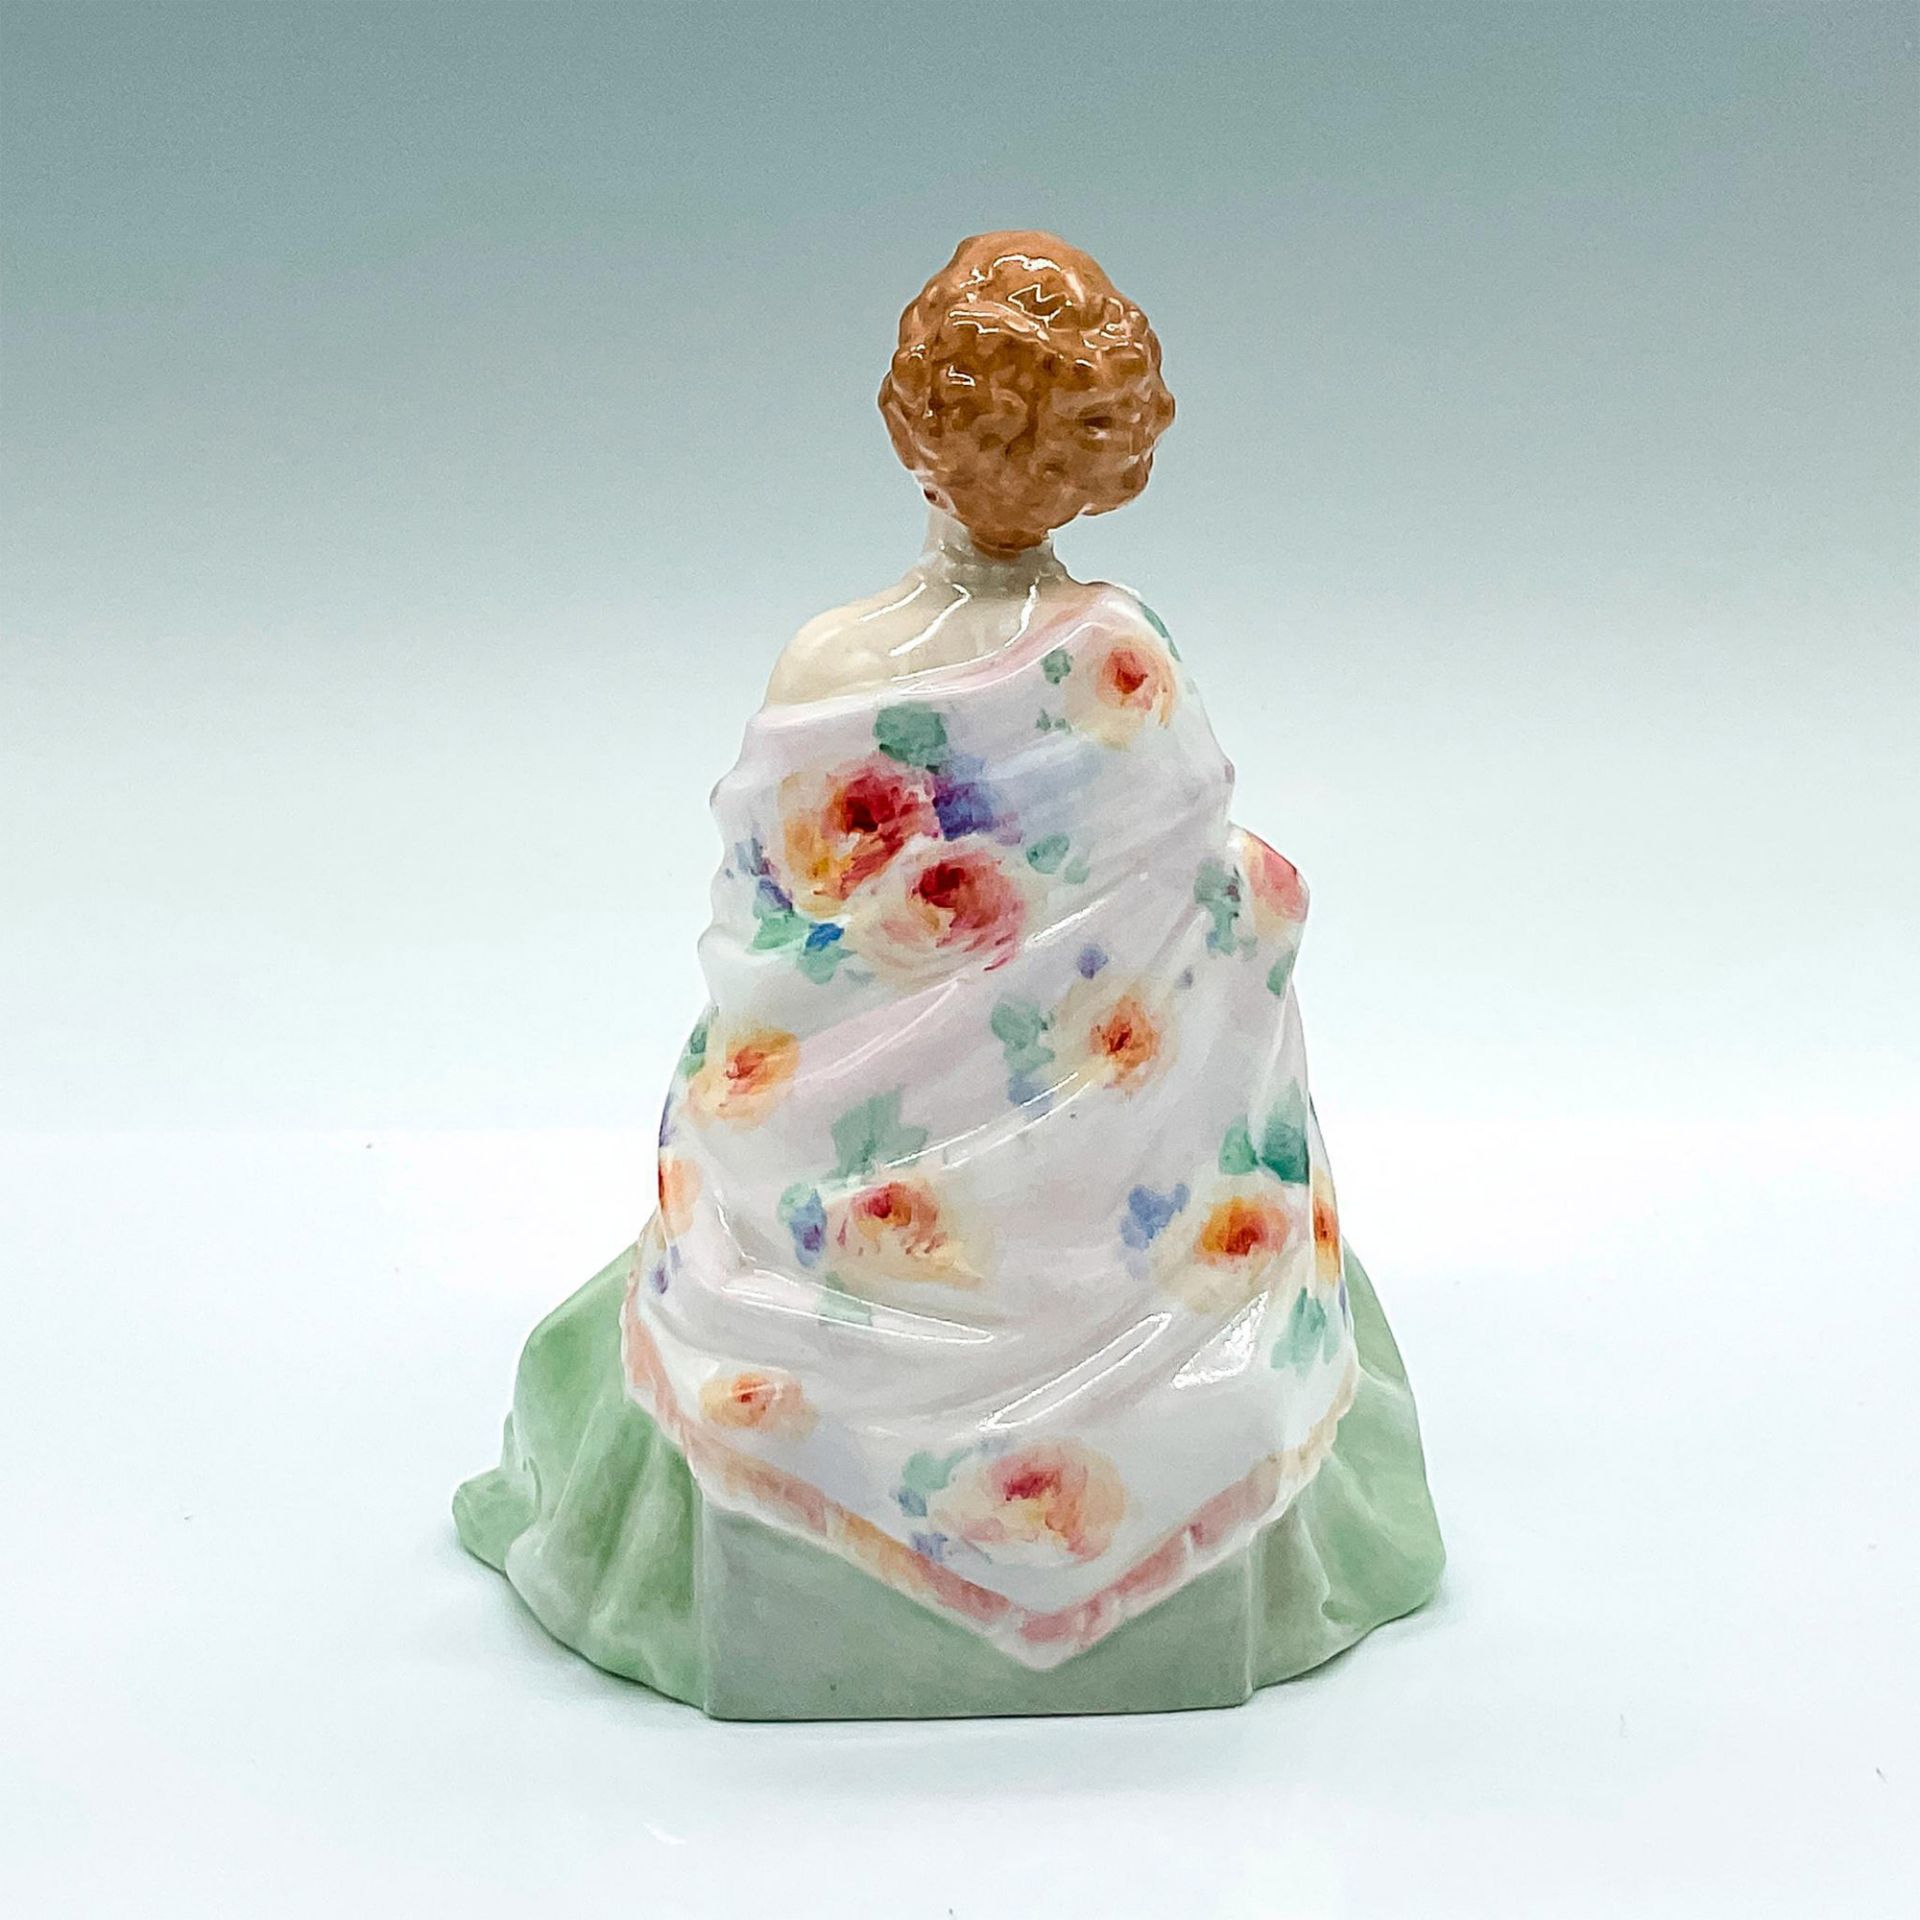 Aileen HN1645 - Royal Doulton Figurine - Image 2 of 3